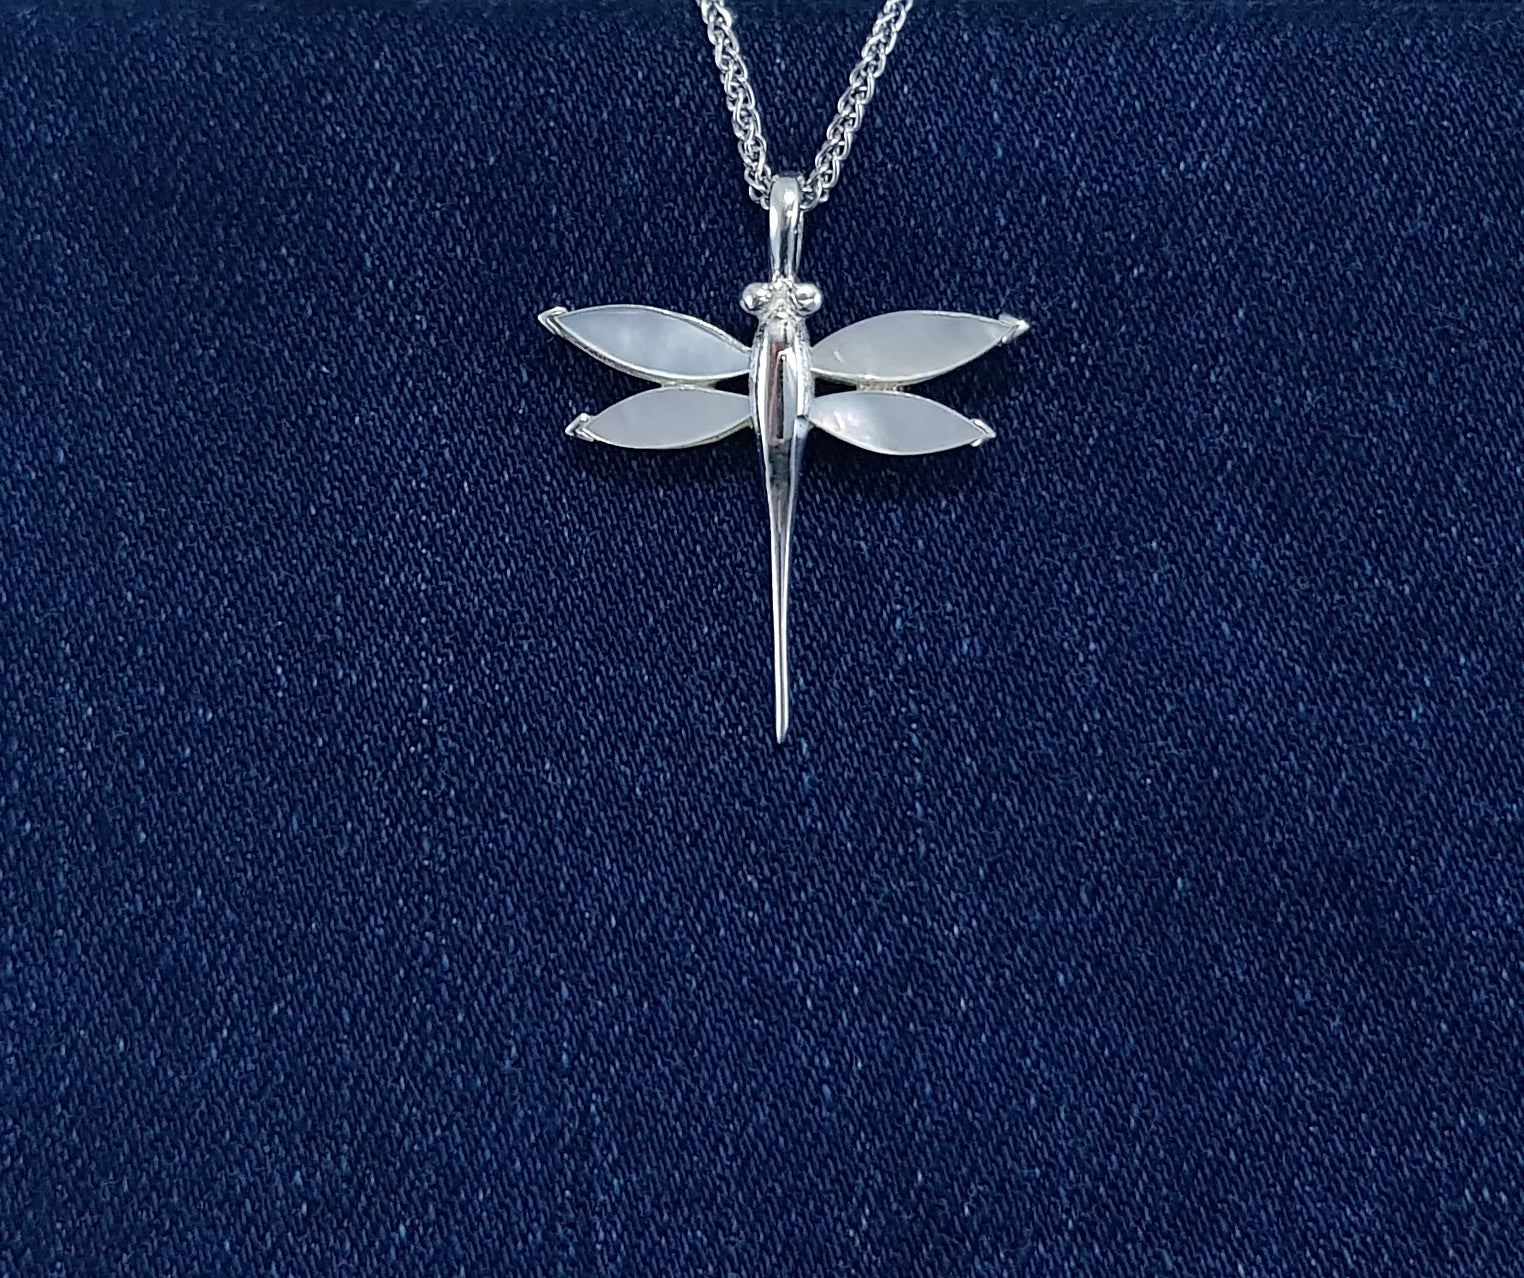 Dragonfly pendant with Mother of Pearl Stones set in Sterling Silver 